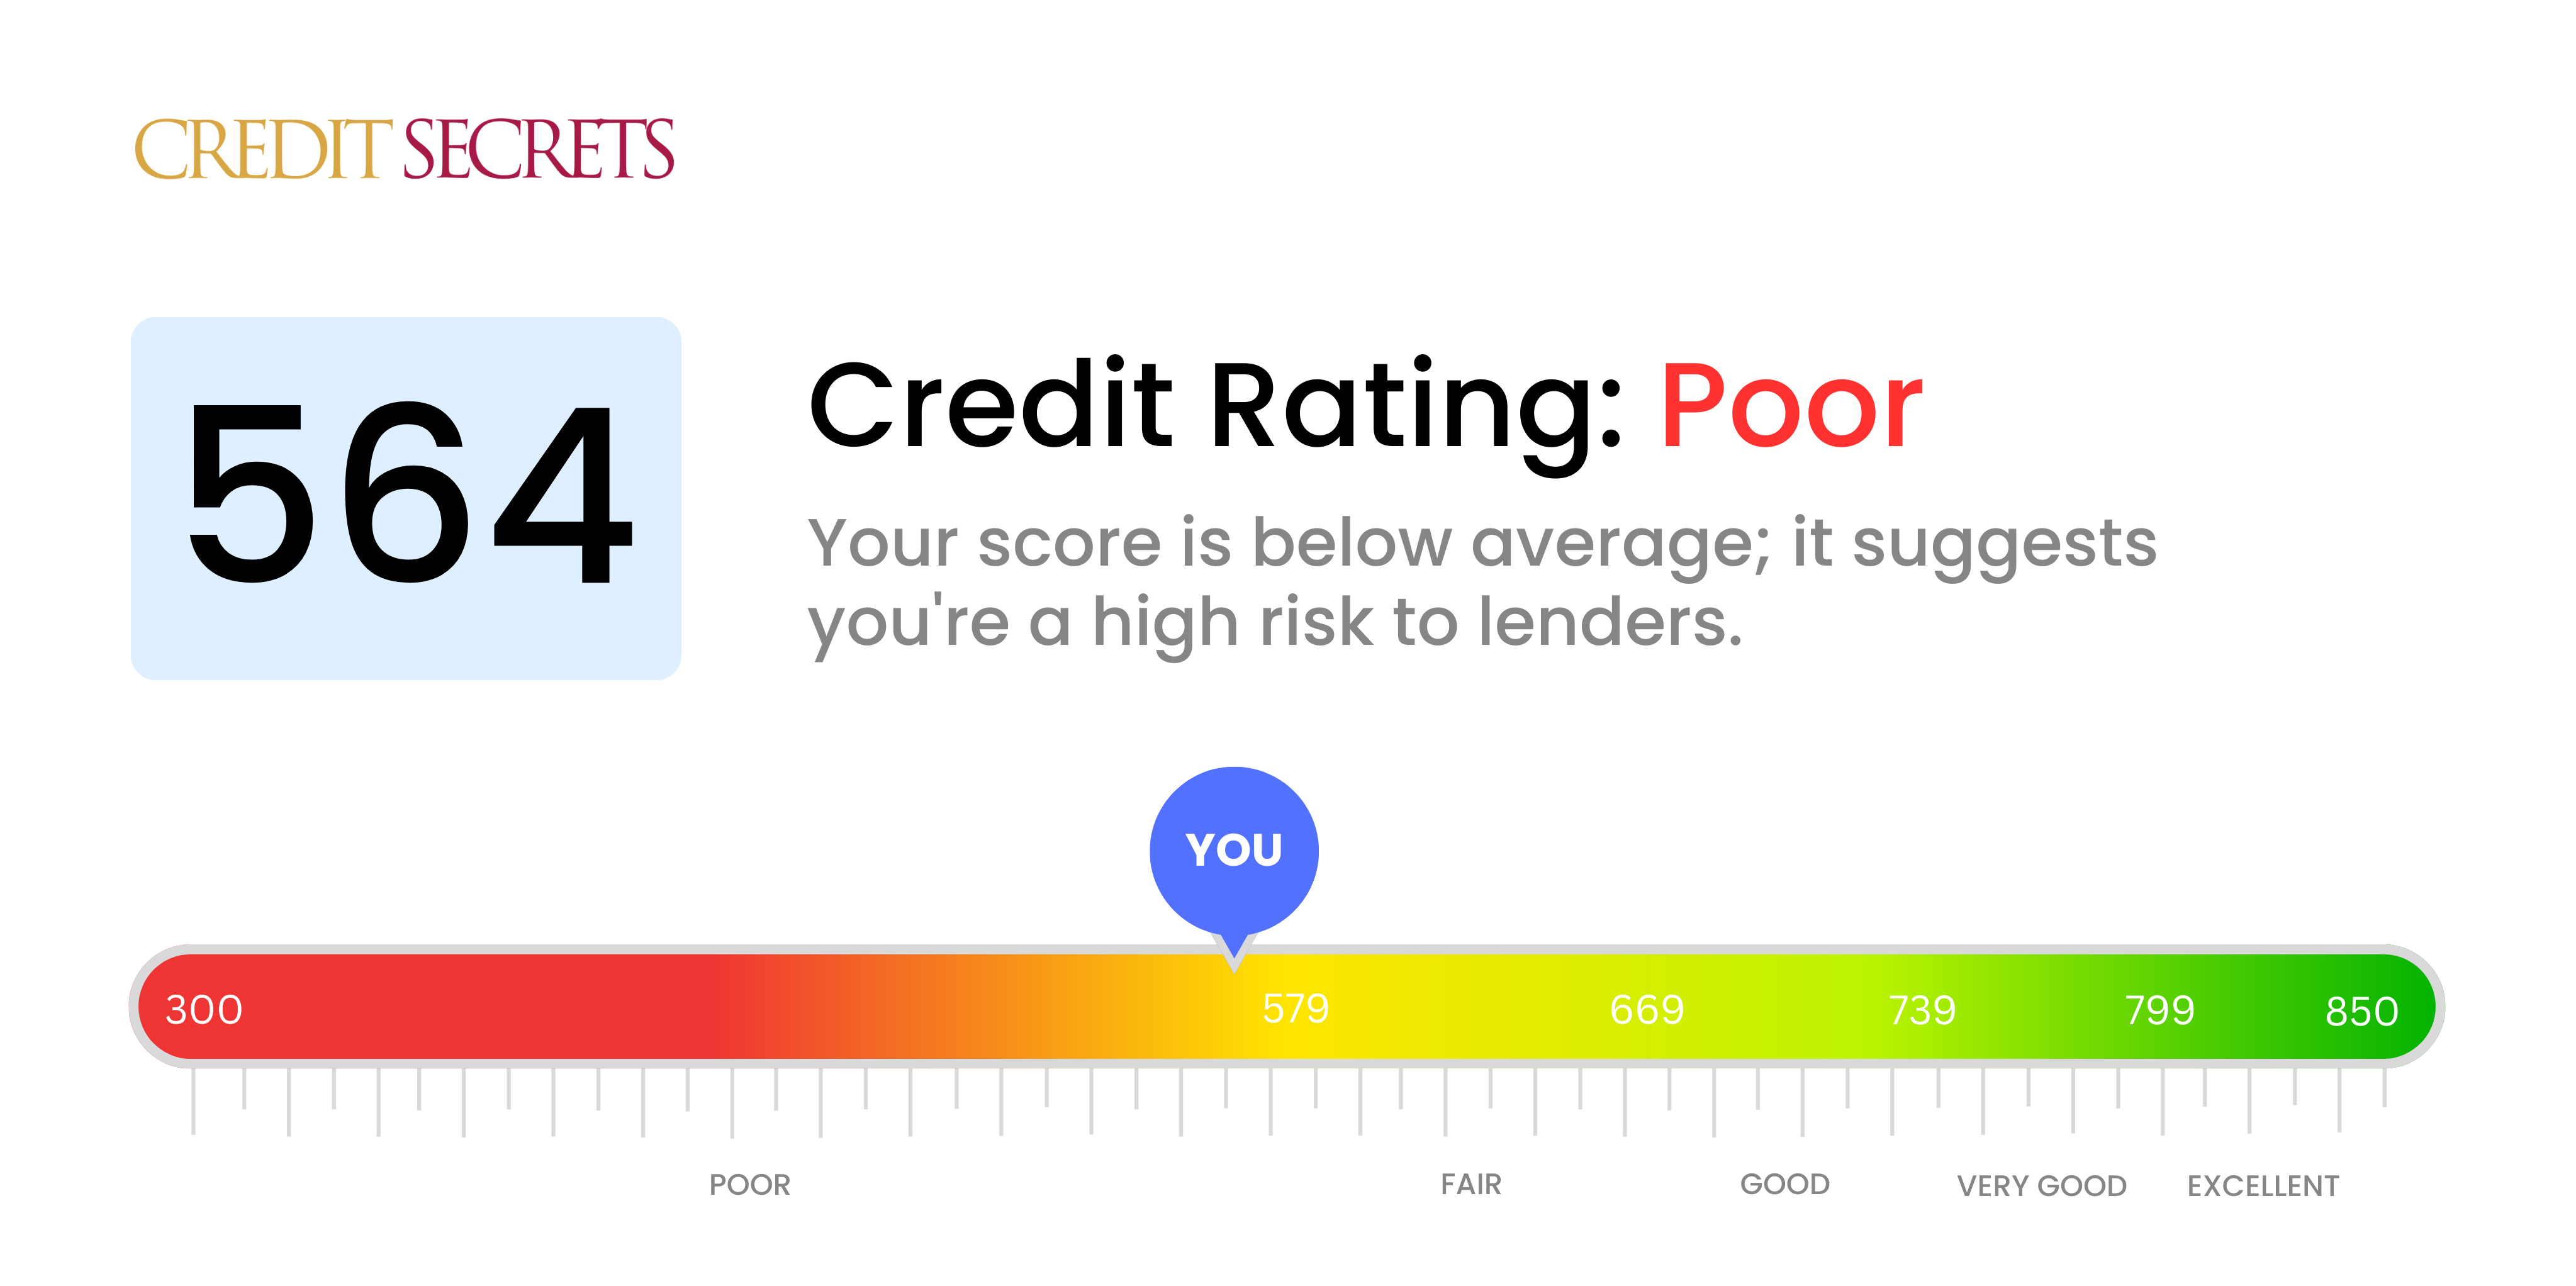 Is 564 a good credit score?